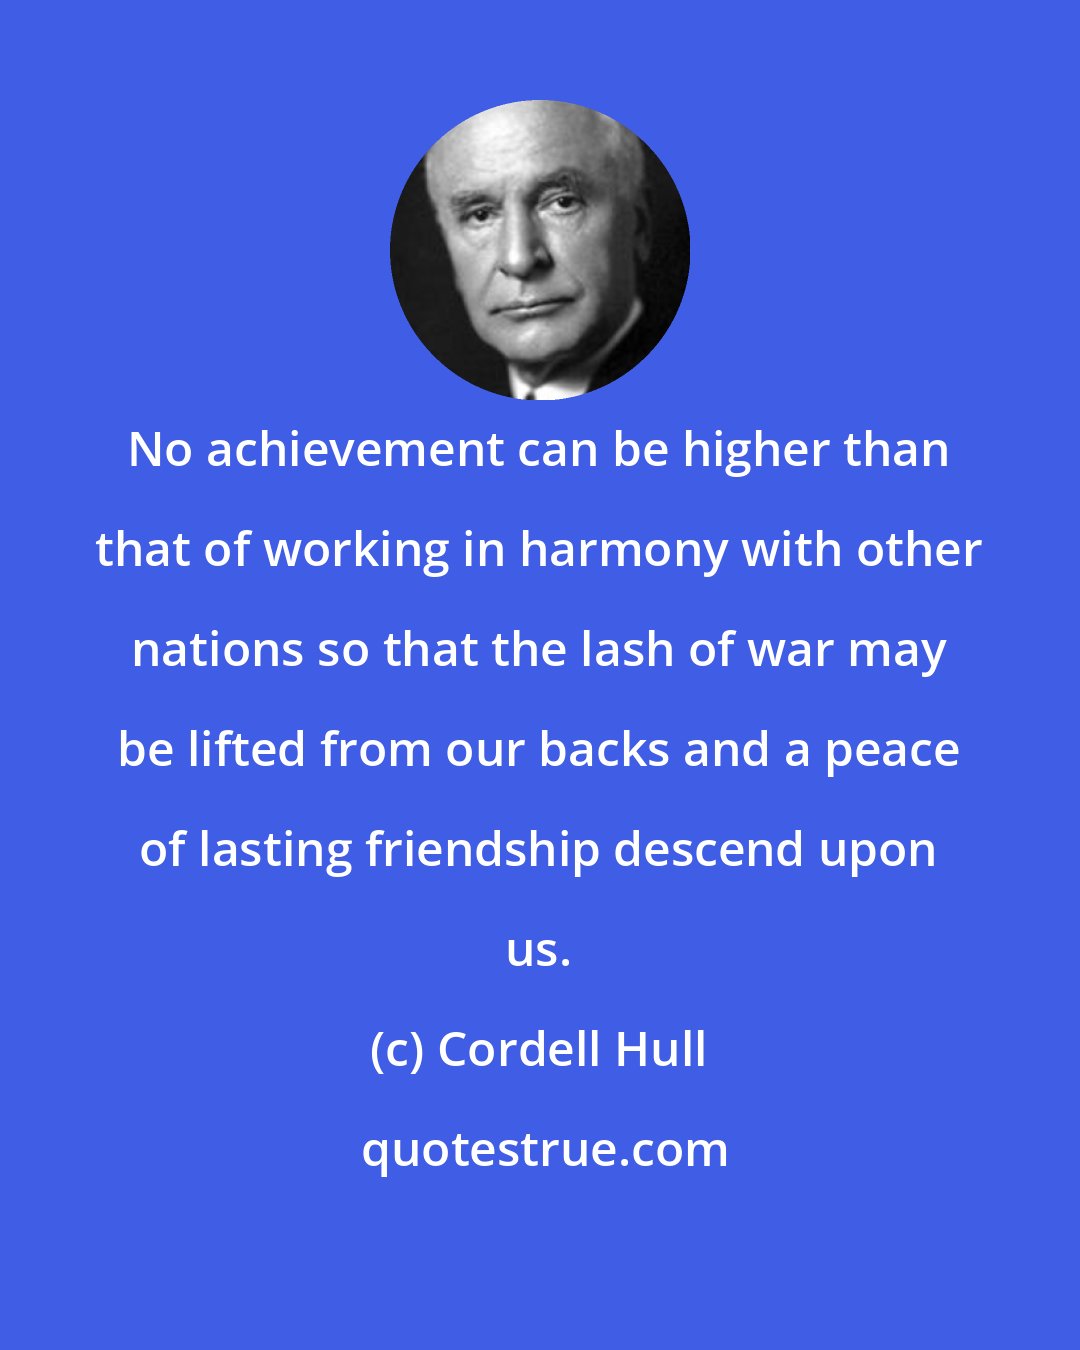 Cordell Hull: No achievement can be higher than that of working in harmony with other nations so that the lash of war may be lifted from our backs and a peace of lasting friendship descend upon us.